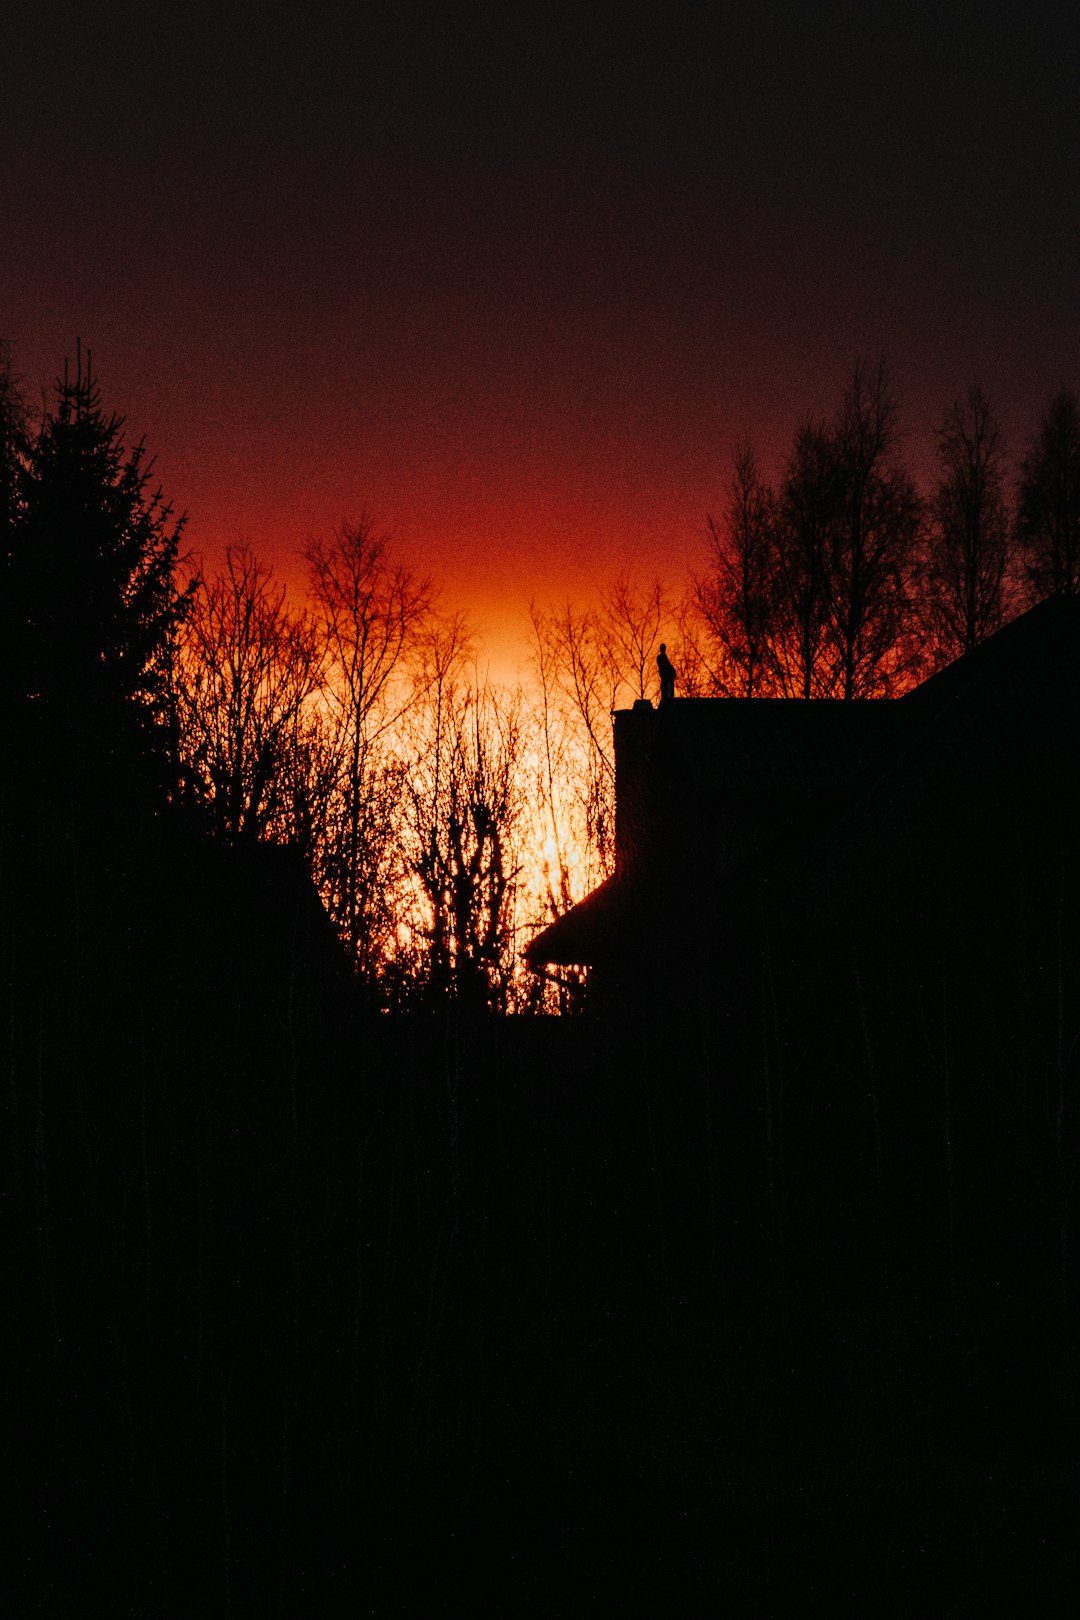 silhouette of house and trees during sunset